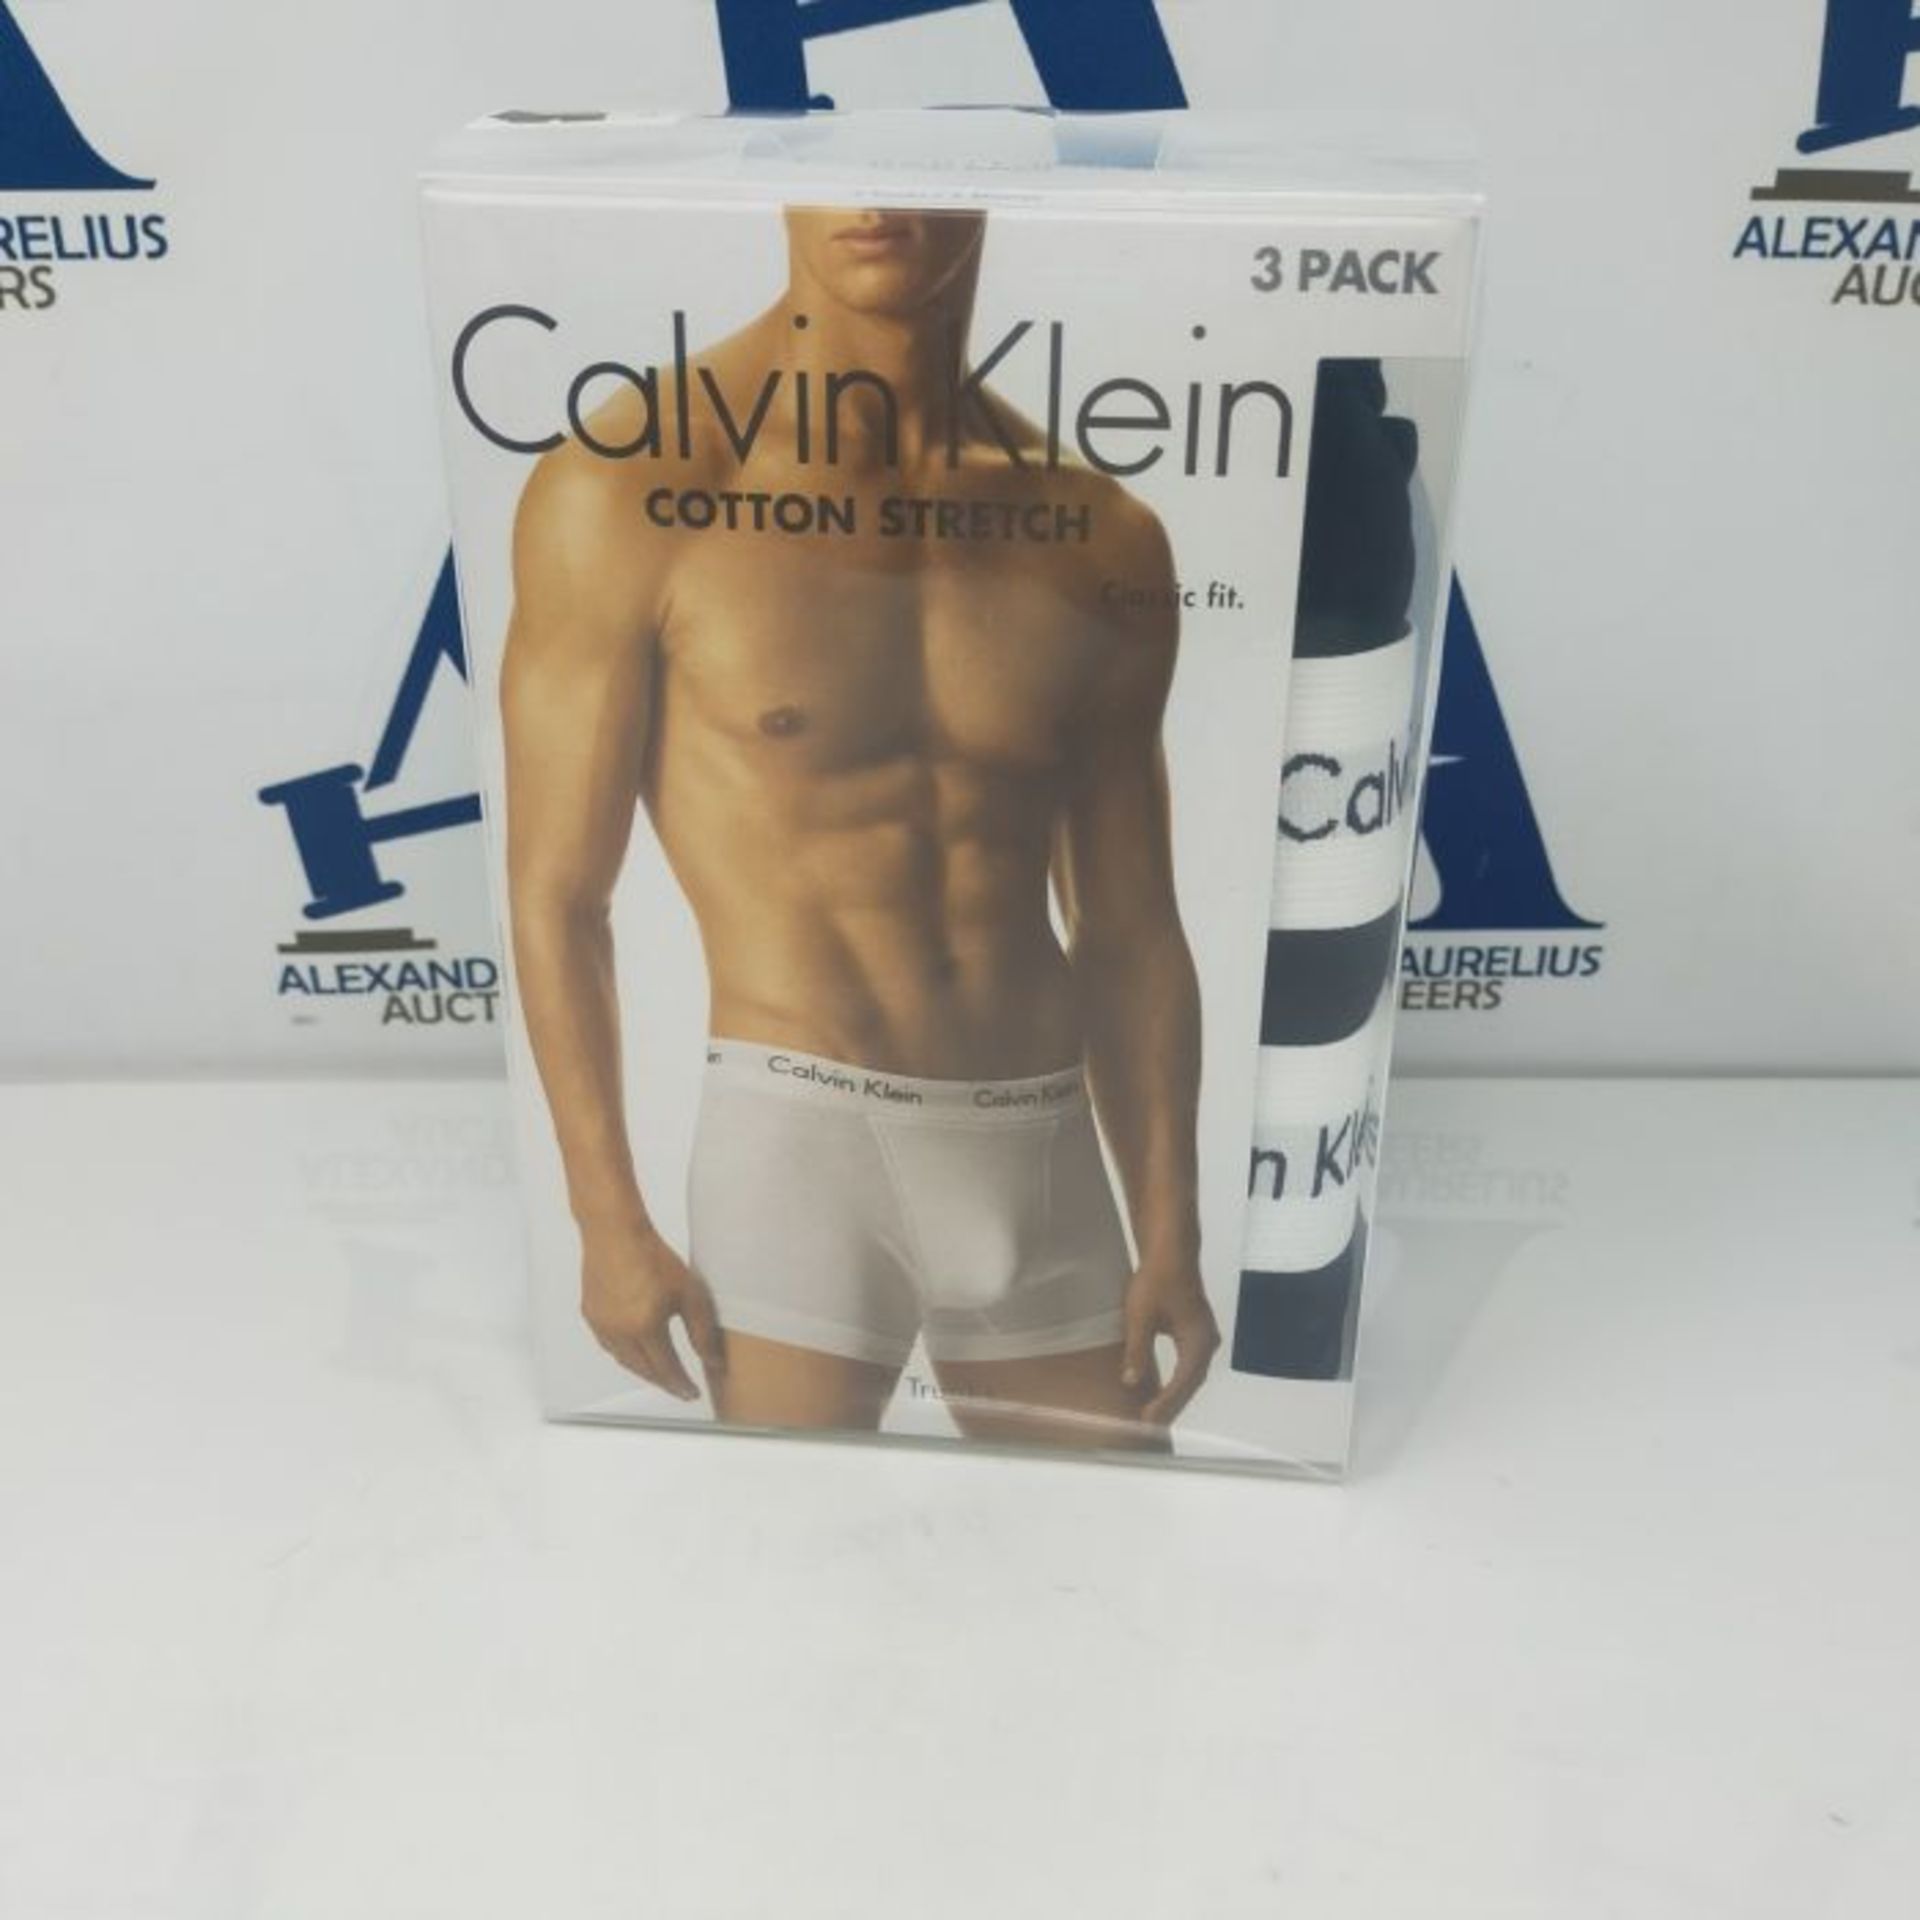 Calvin Klein Cotton Stretch Trunk Black 3 Pack - Large - Image 2 of 2